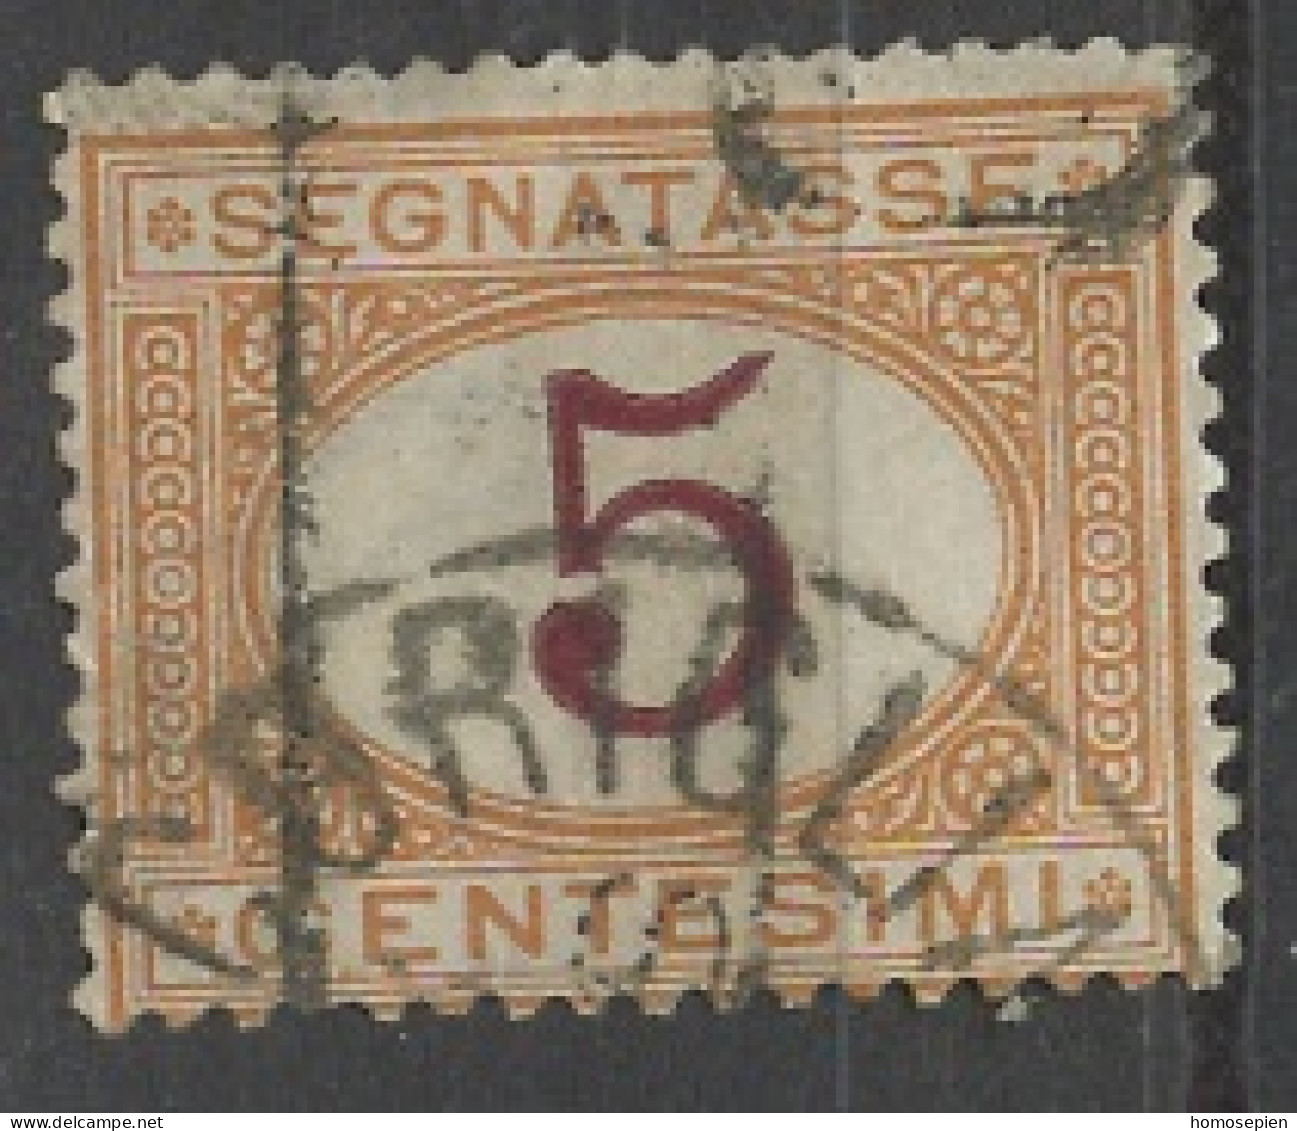 Italie - Italy - Italien Taxe 1870-1903 Y&T N°T5 - Michel N°P5 (o) - 5c Chiffre - Postage Due